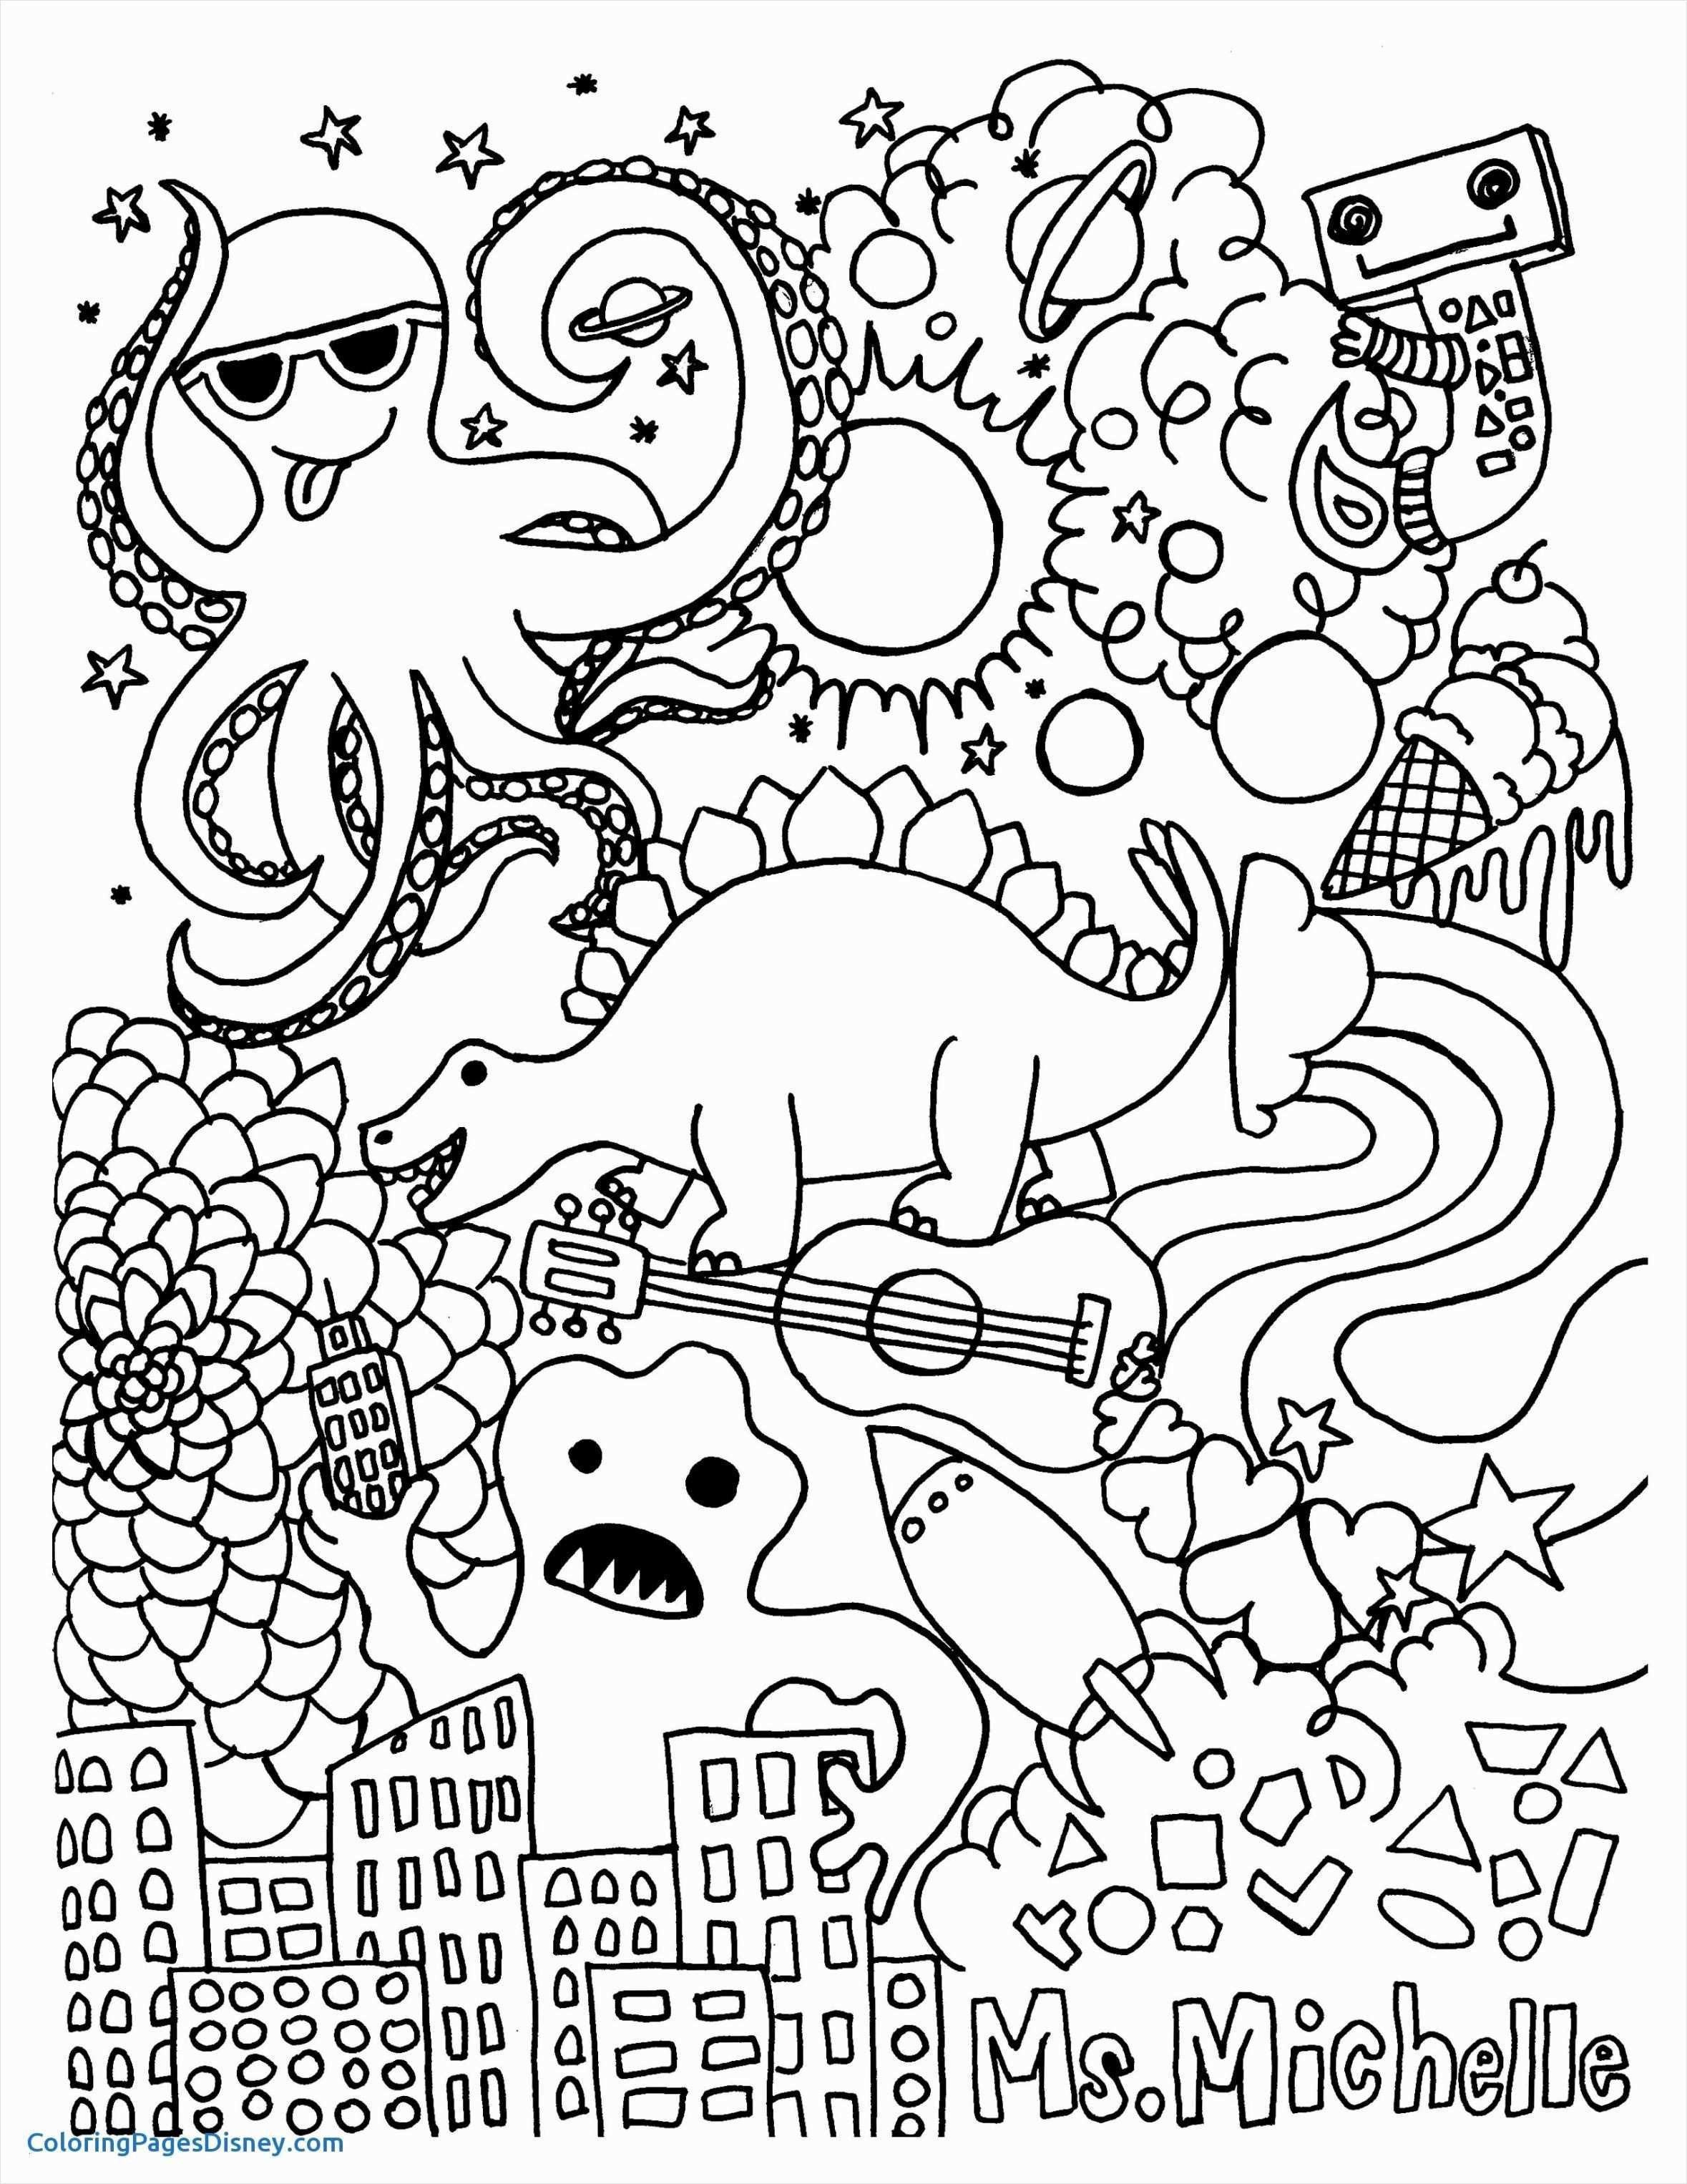 Giant Coloring Pages For Adults Omy Giant Coloring Page Fresh Coloring Page Giant Coloring Pages